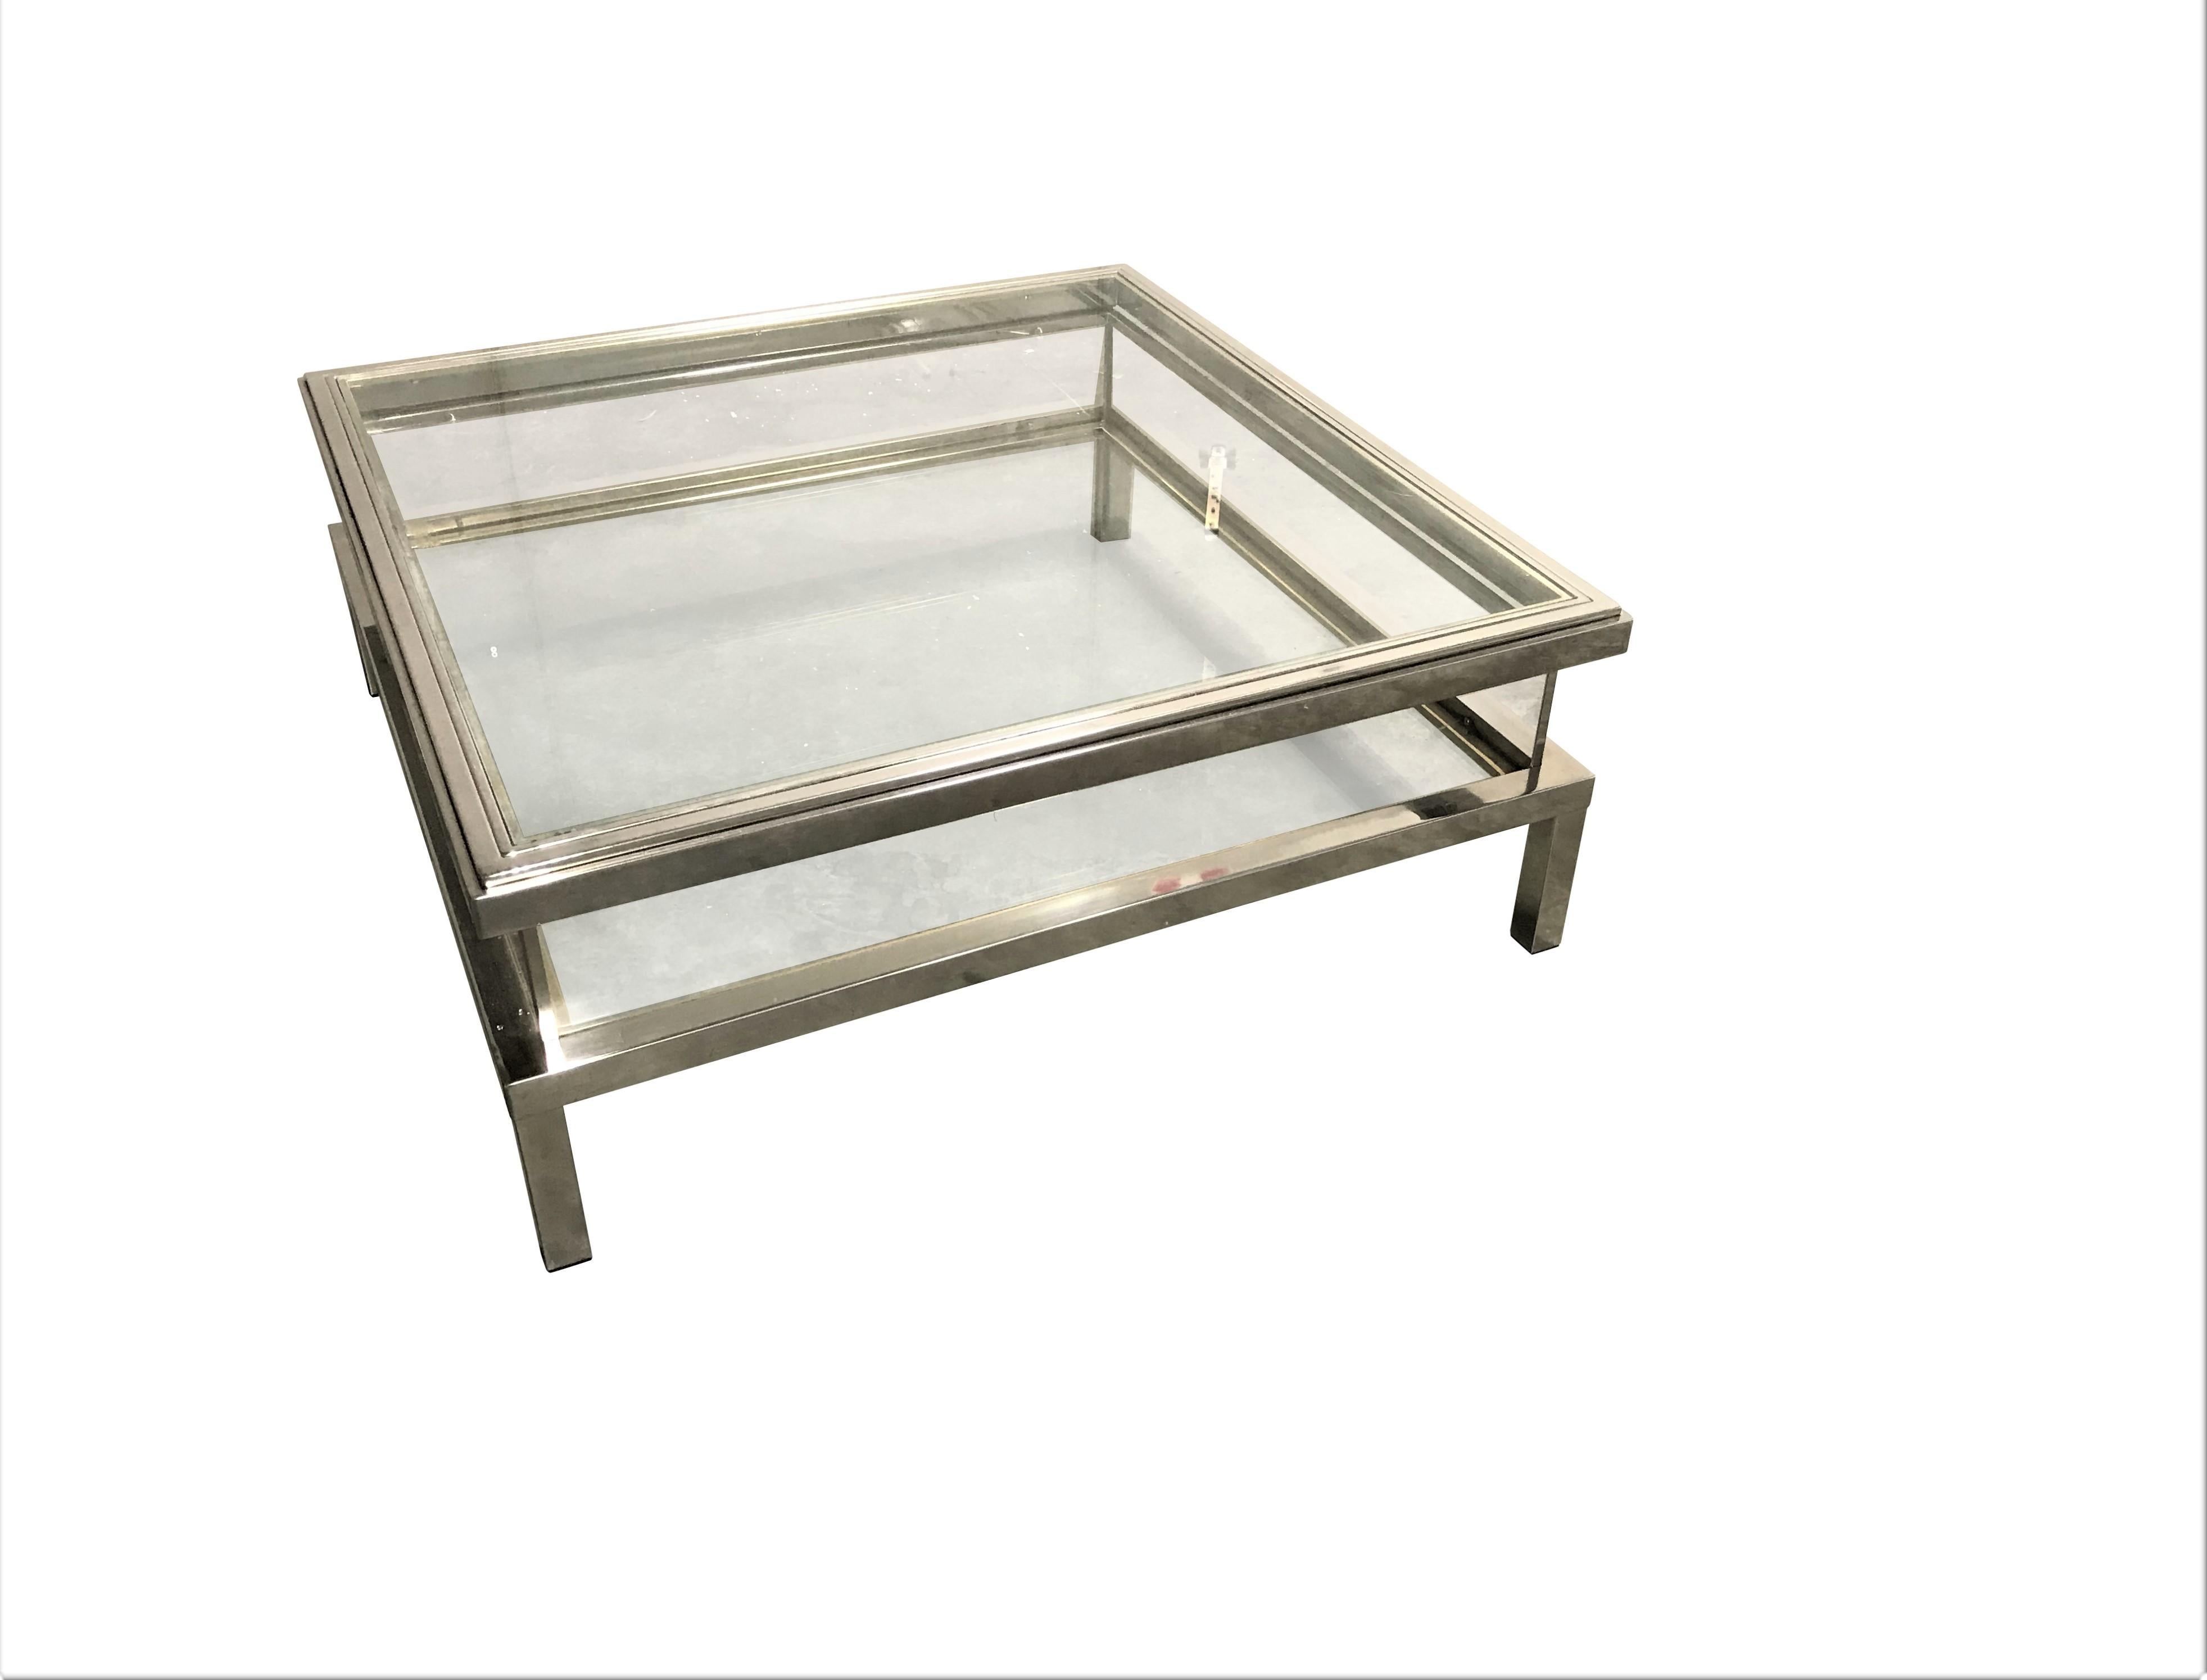 Vintage chrome and brass coffee table with a sliding glass top.

This luxurious appeal table is made from heavy quality chromed metal and glass.

It is ideal to display curio and store magazines.

The table is in used condition and was left